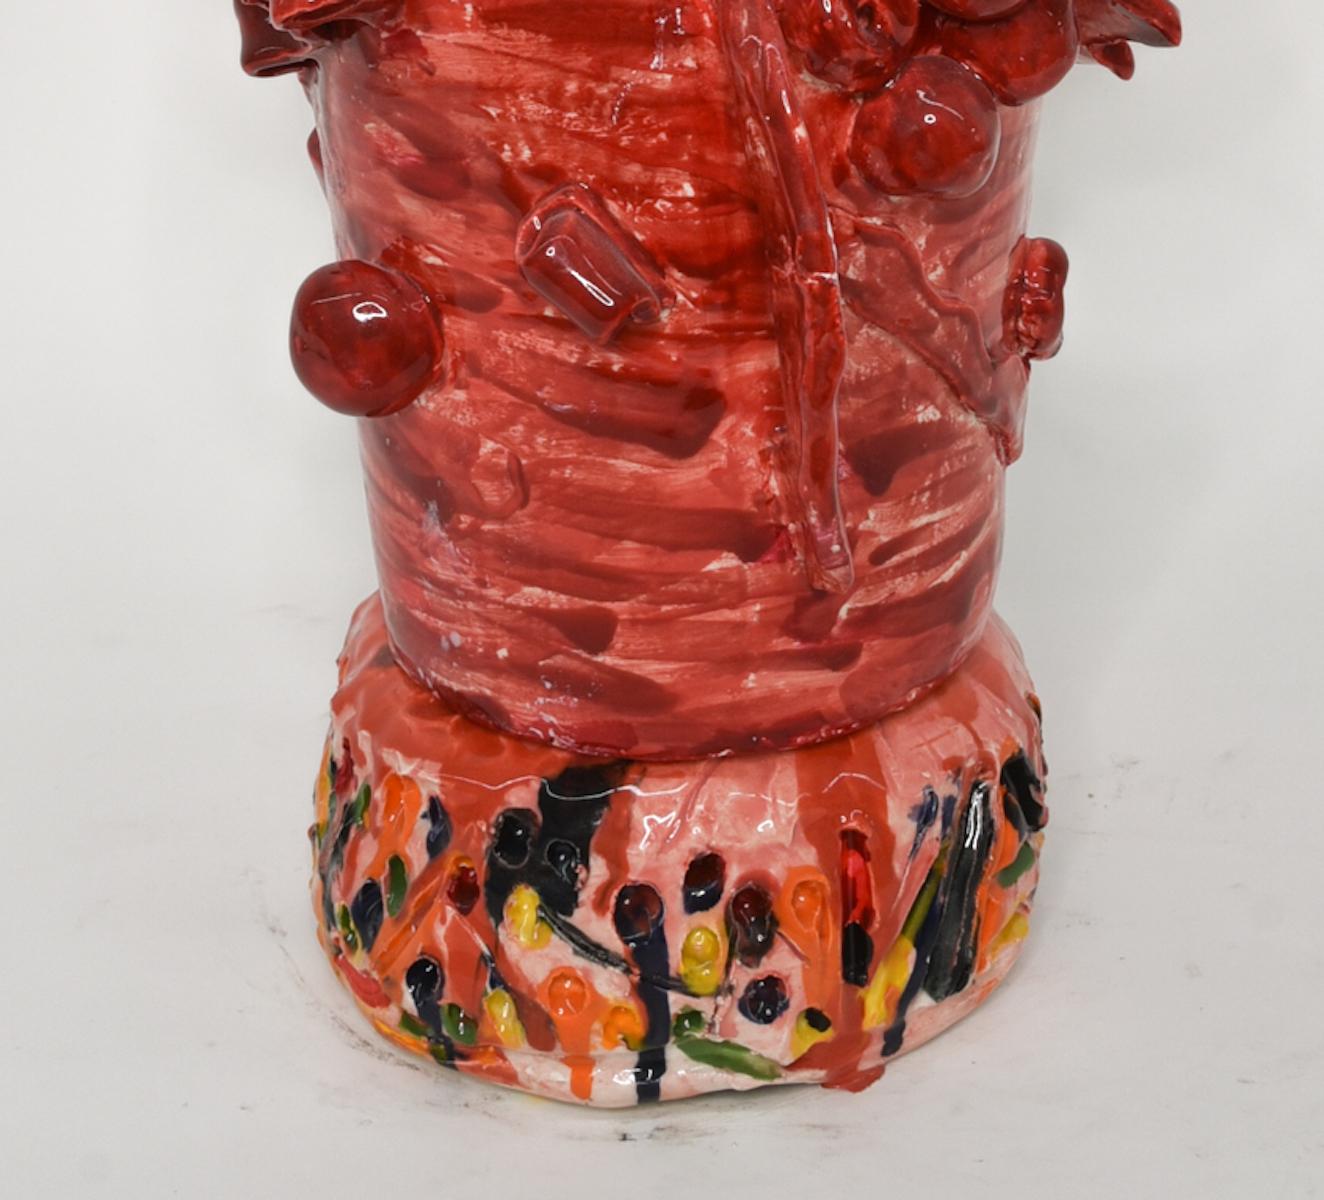 Untitled XIX. Glazed ceramic abstract jar  sculpture - Sculpture by Charo Oquet